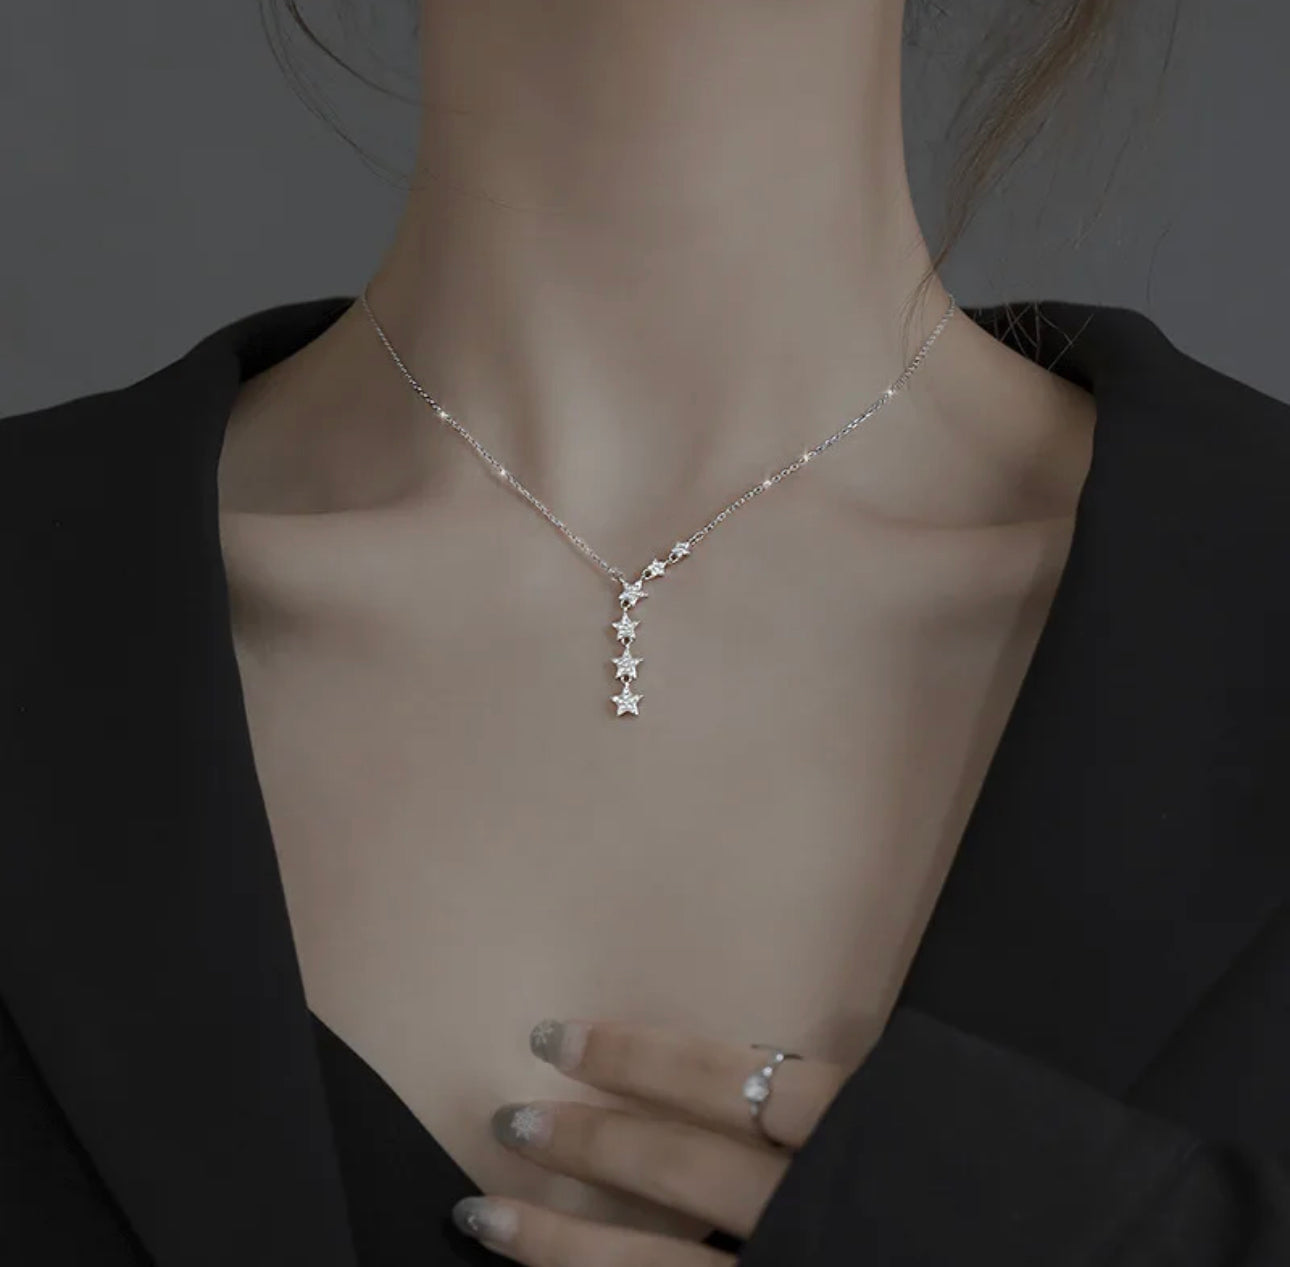 a woman wearing a necklace with stars on it